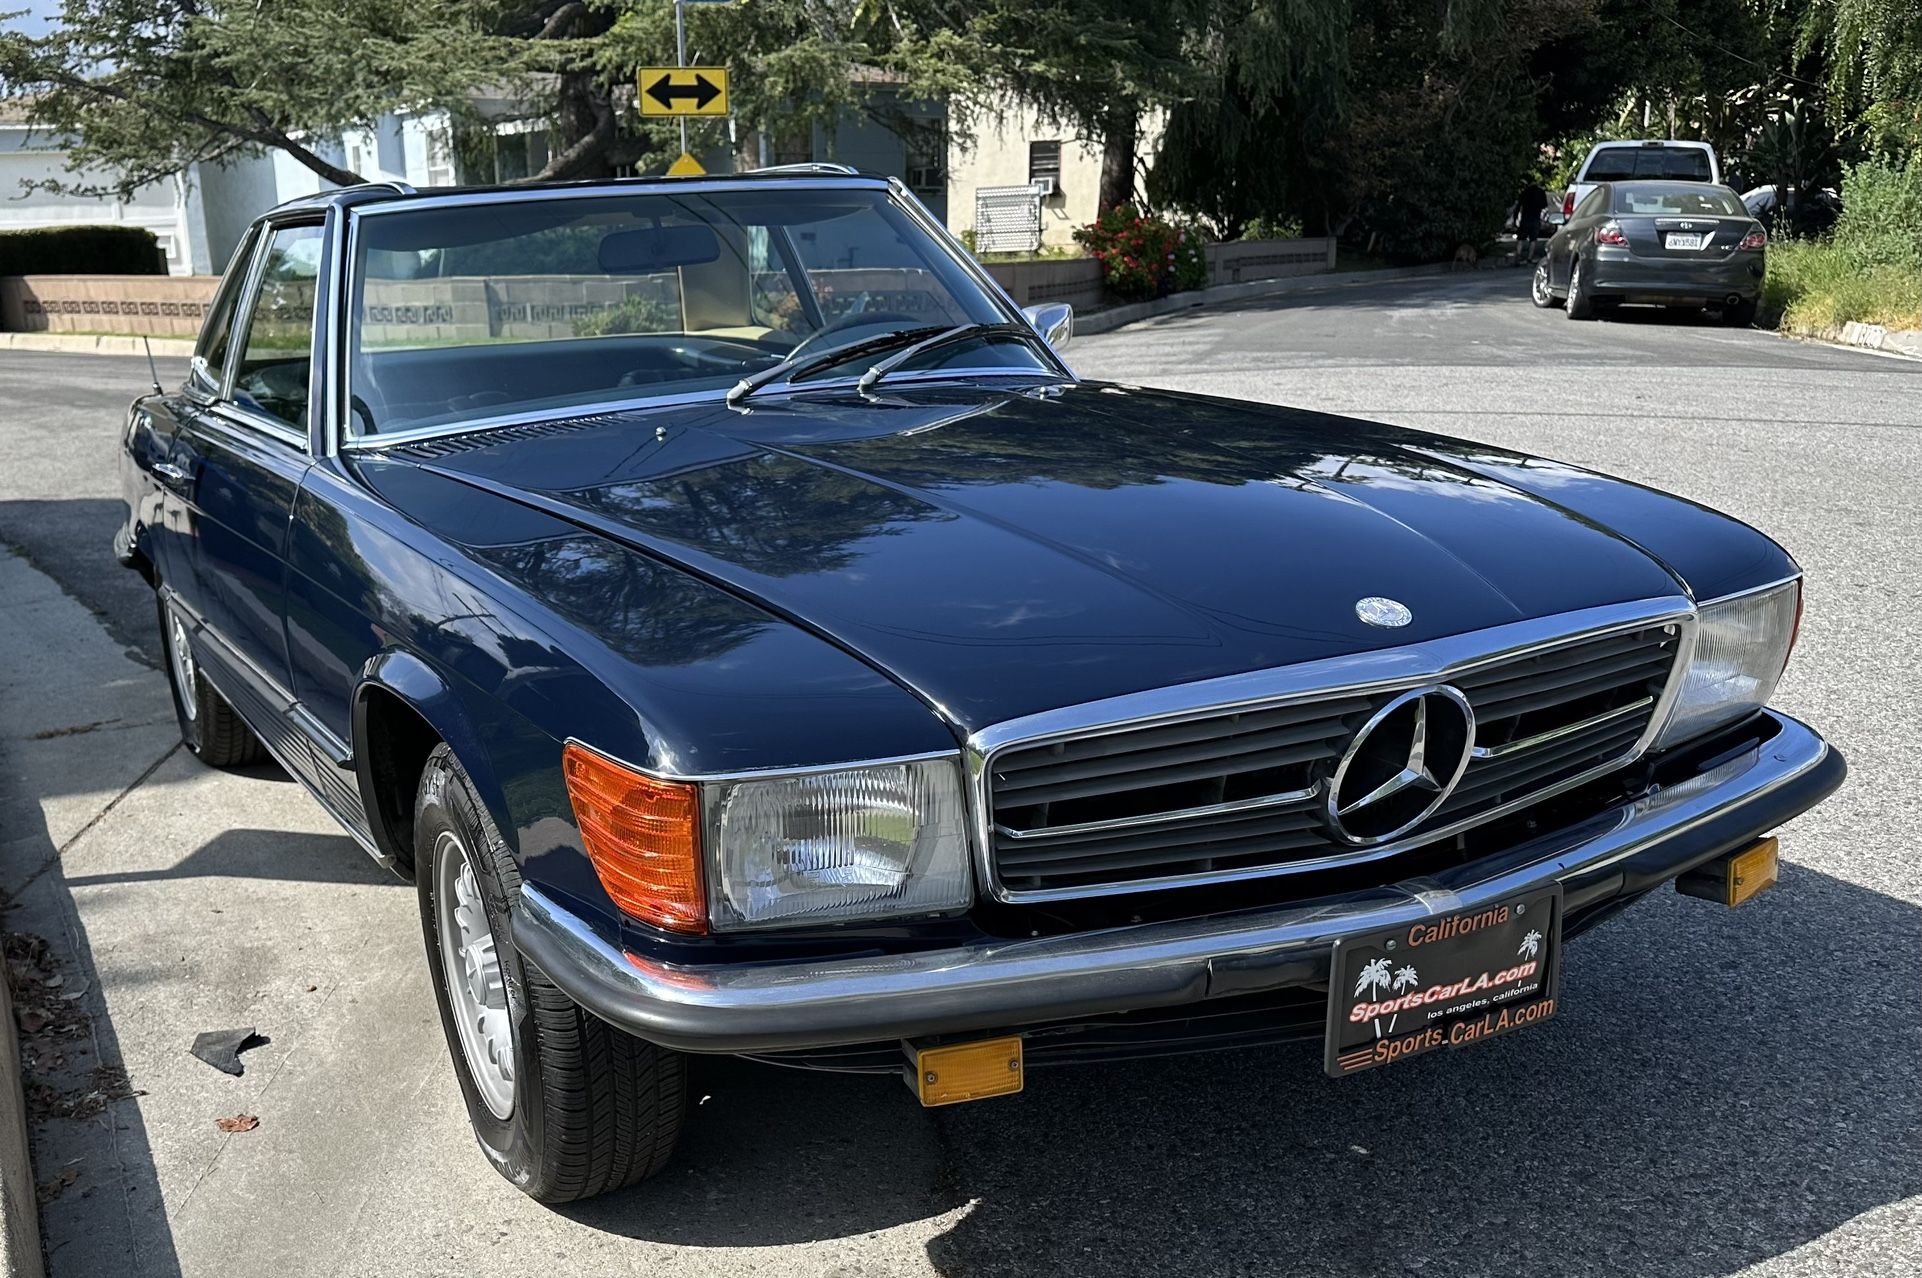 1972 Mercedes Benz 350 SL ( this is a real 3.5 high performance model made for European market vin # 10743) extremely early model with no head rest, c